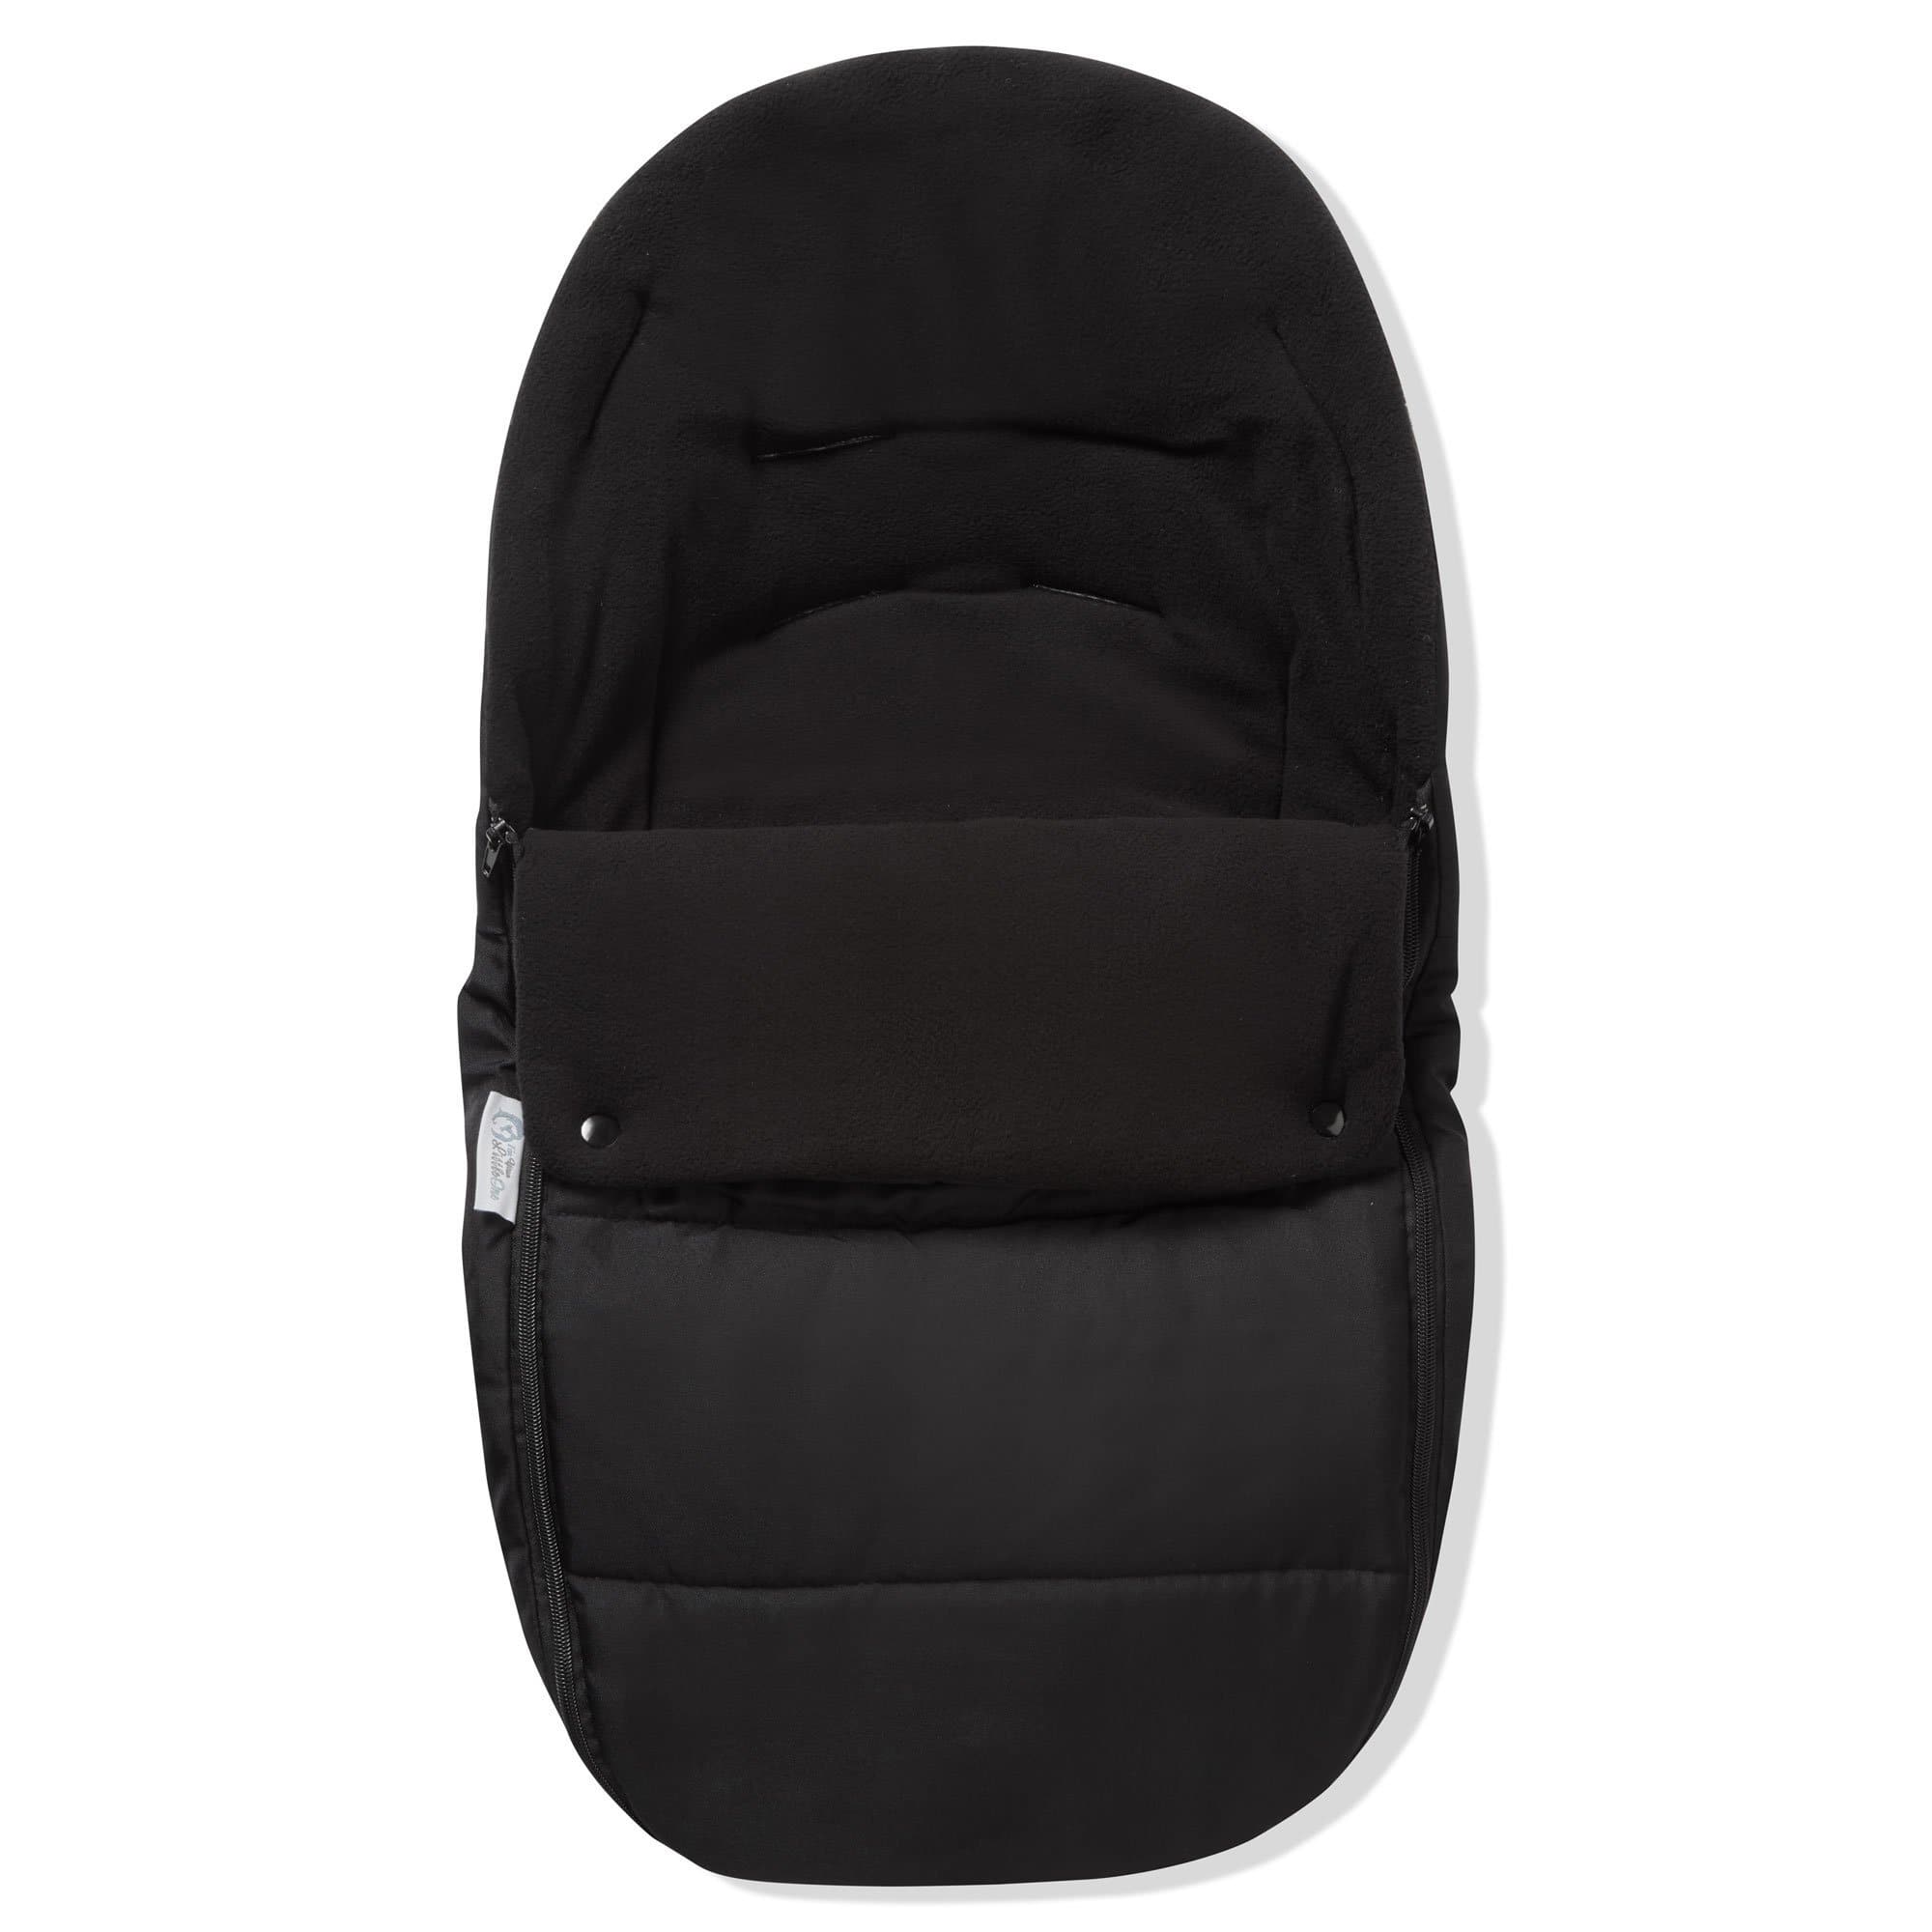 Premium Car Seat Footmuff / Cosy Toes Compatible with Mee-Go - Black Jack / Fits All Models | For Your Little One